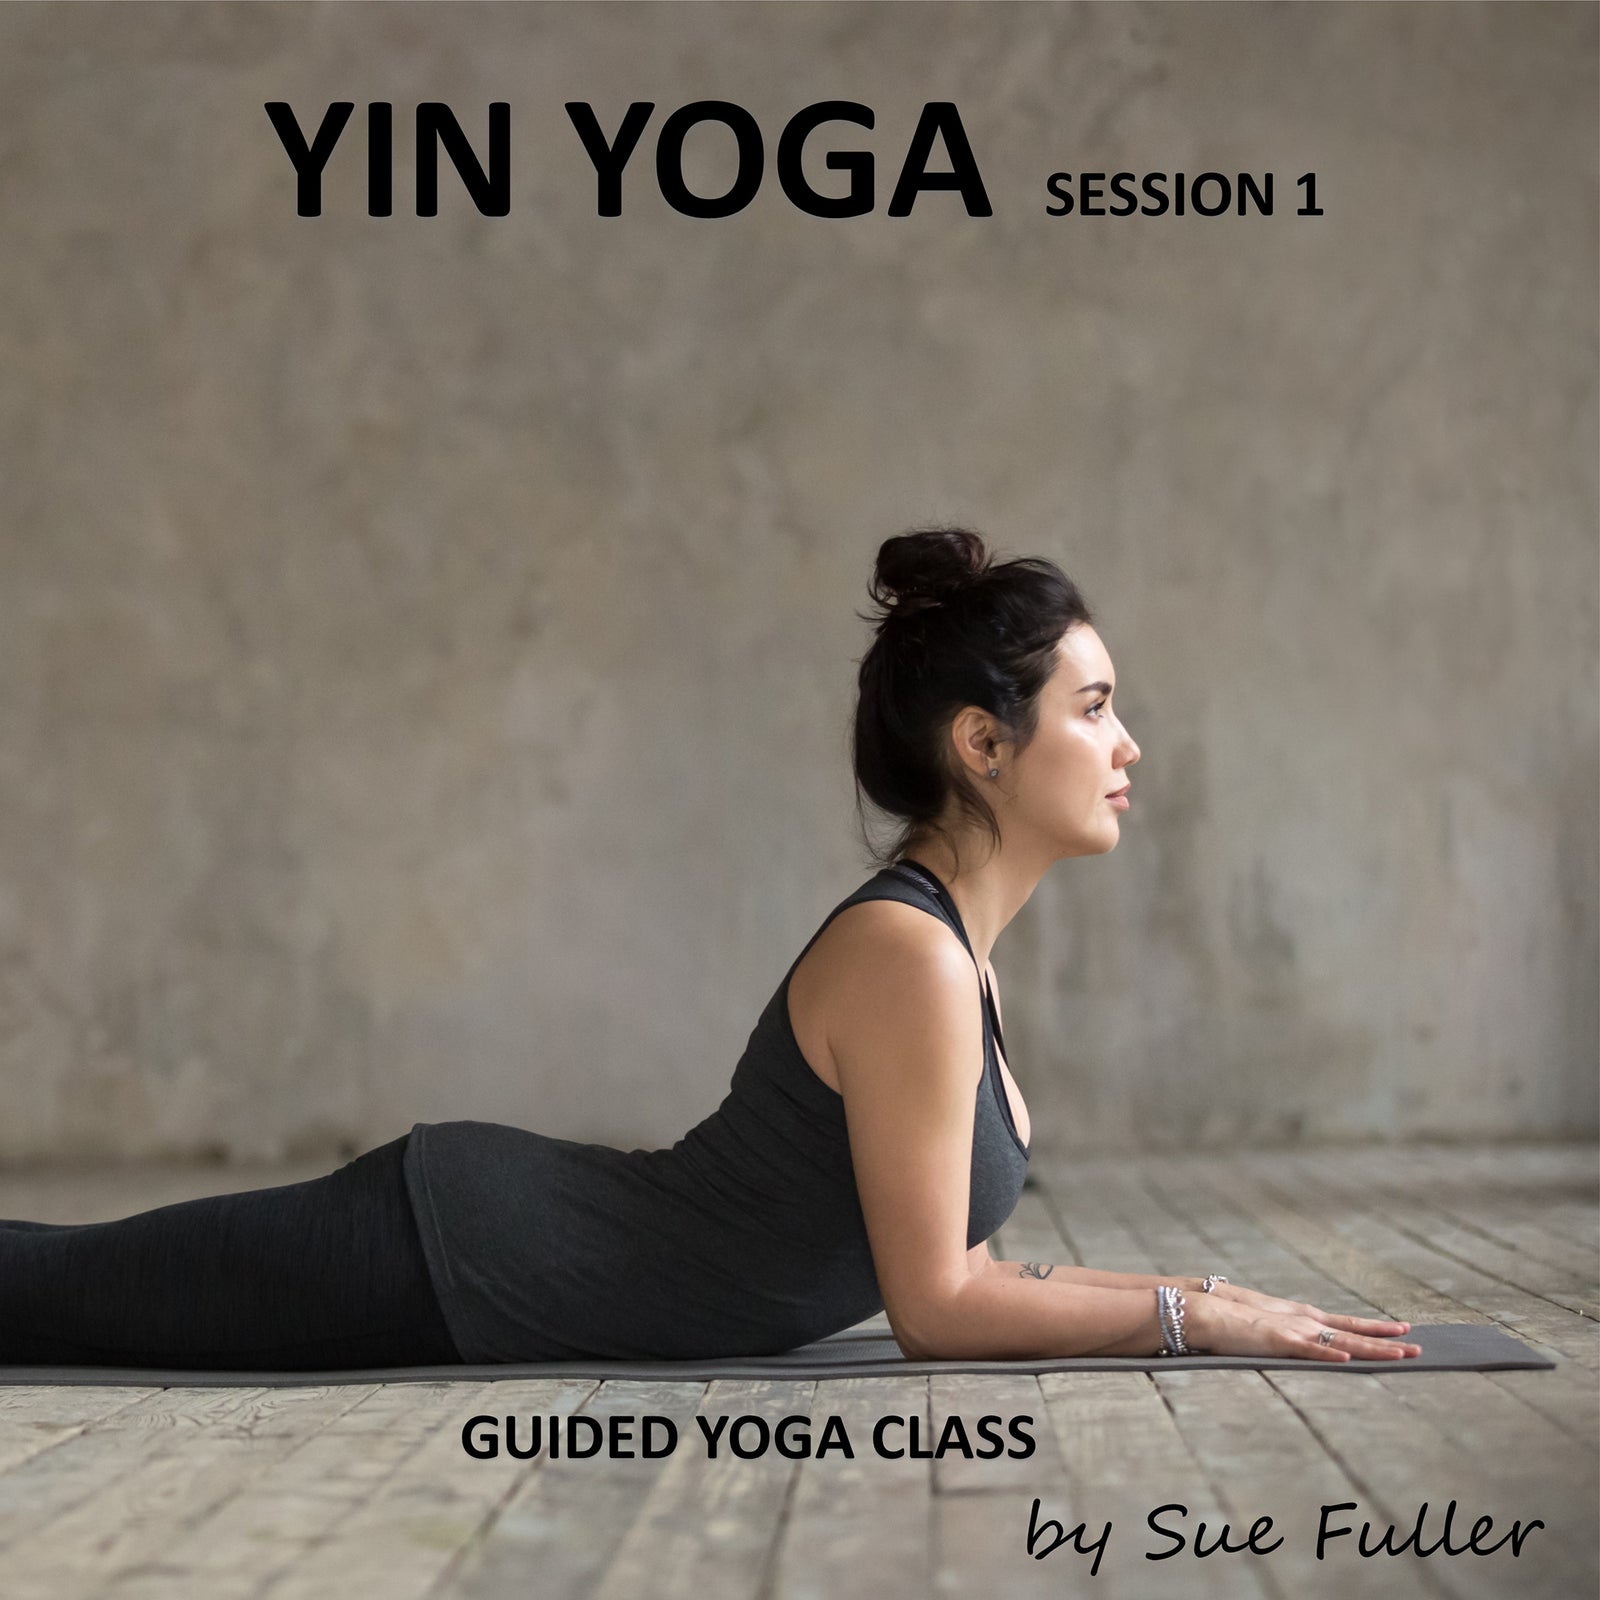 Yin Yoga sequence for mental clarity & emotional balance | Yin yoga sequence,  Yin yoga, Yin yoga poses